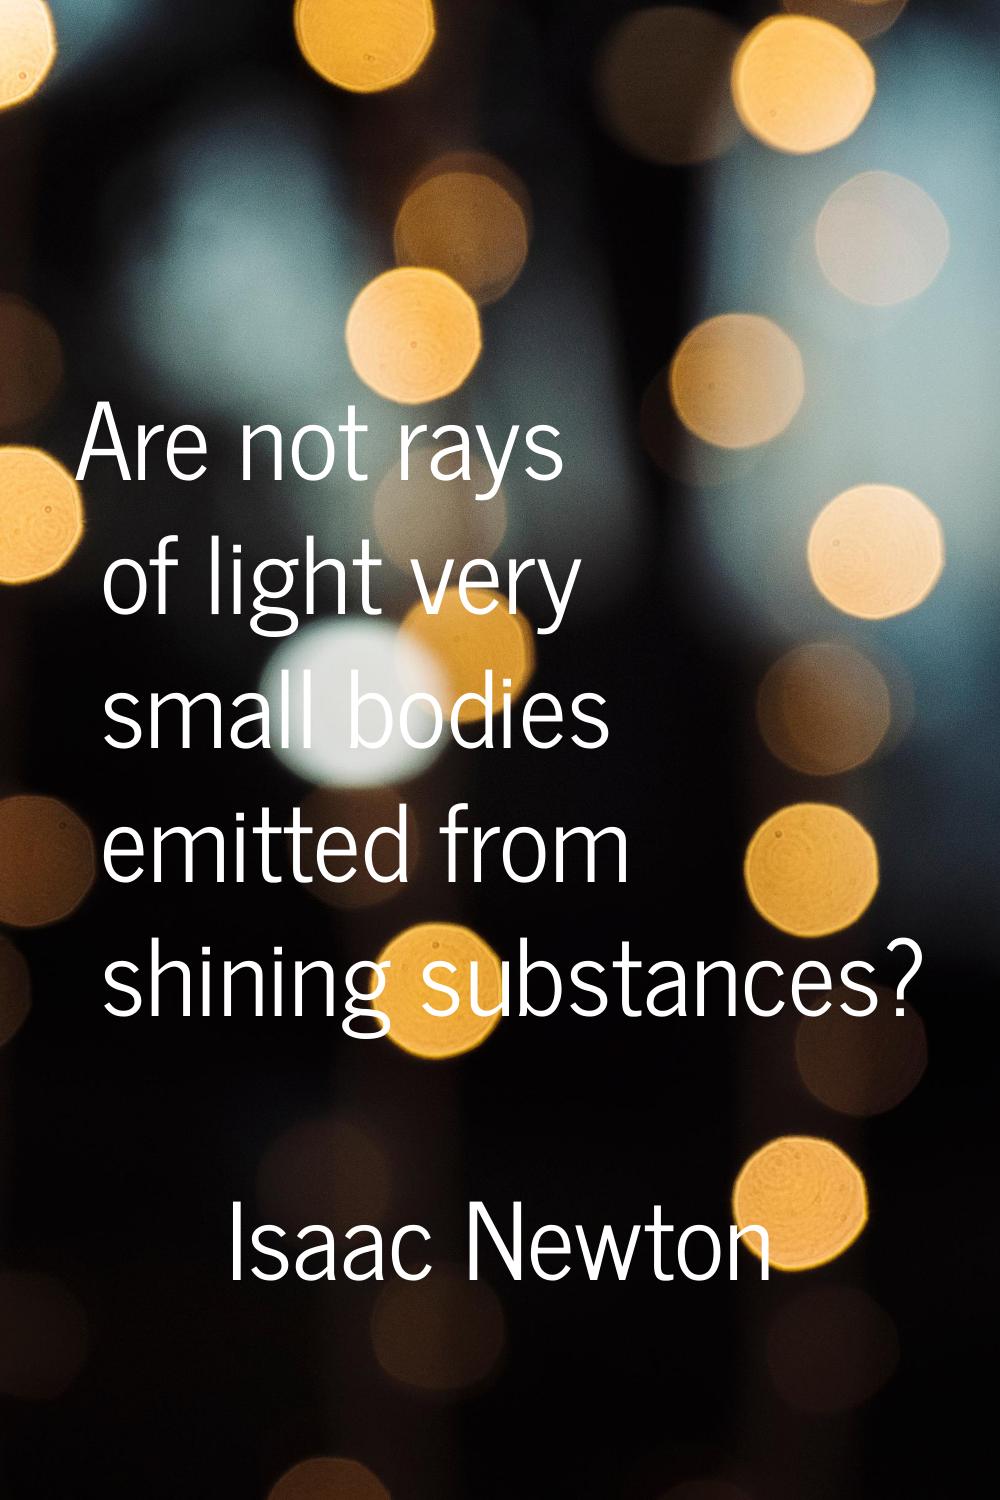 Are not rays of light very small bodies emitted from shining substances?